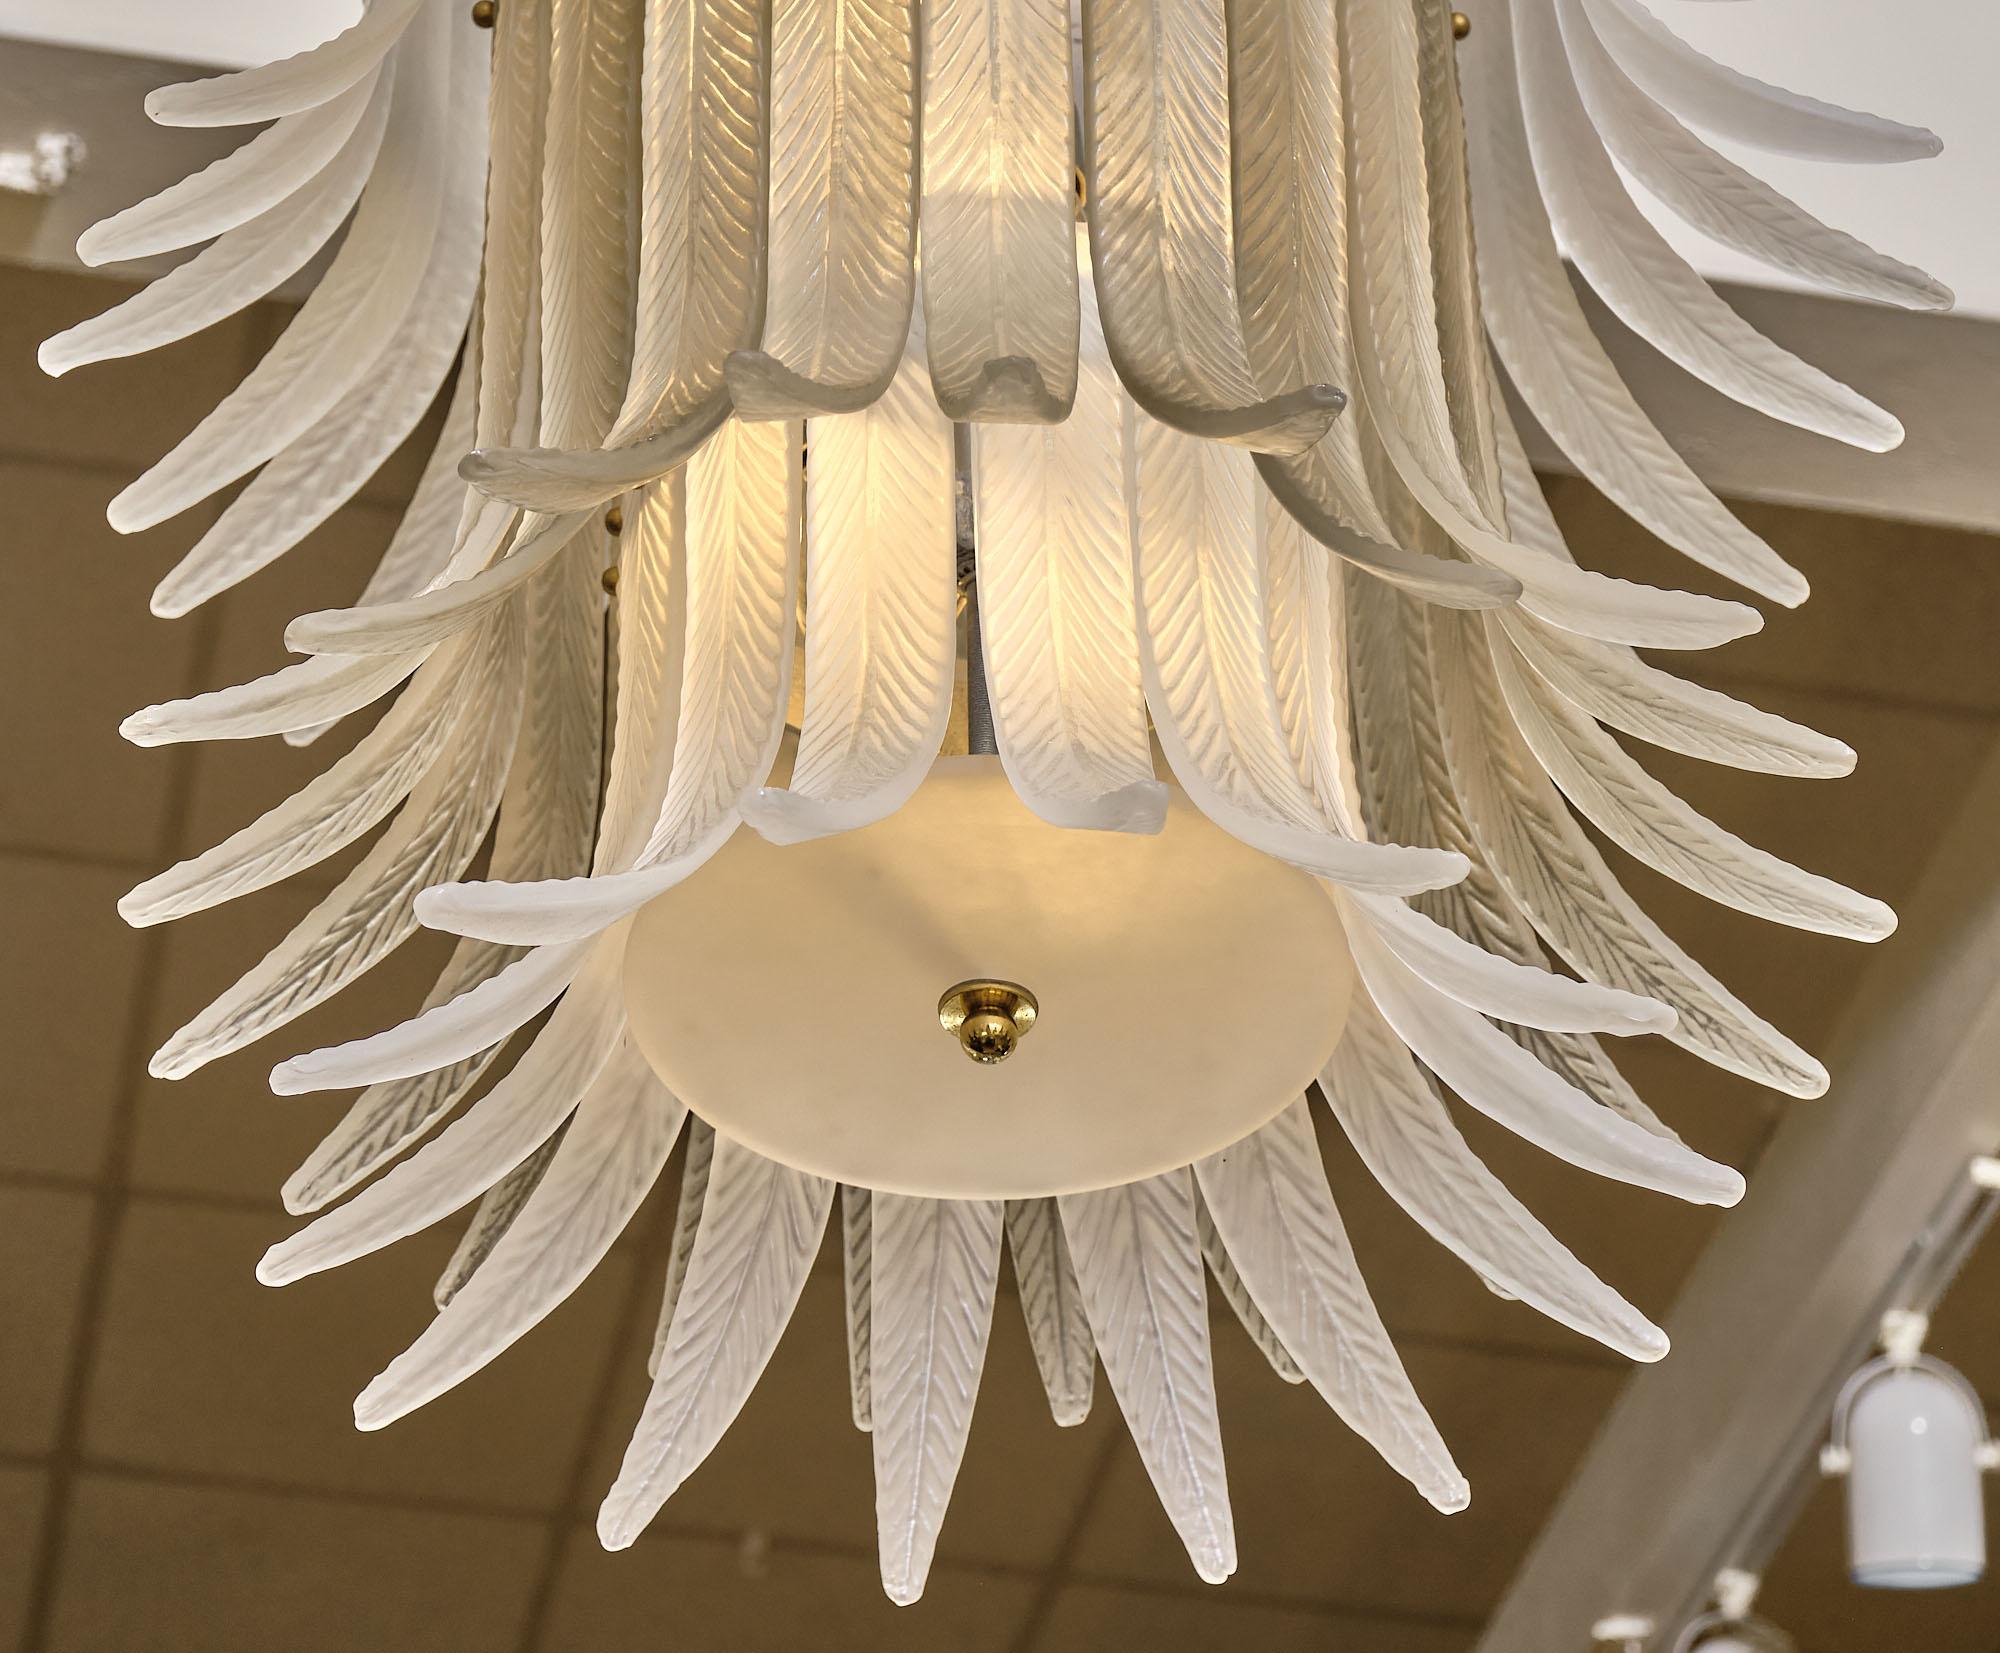 Murano Glass “Plume” Chandelier In Good Condition For Sale In Austin, TX